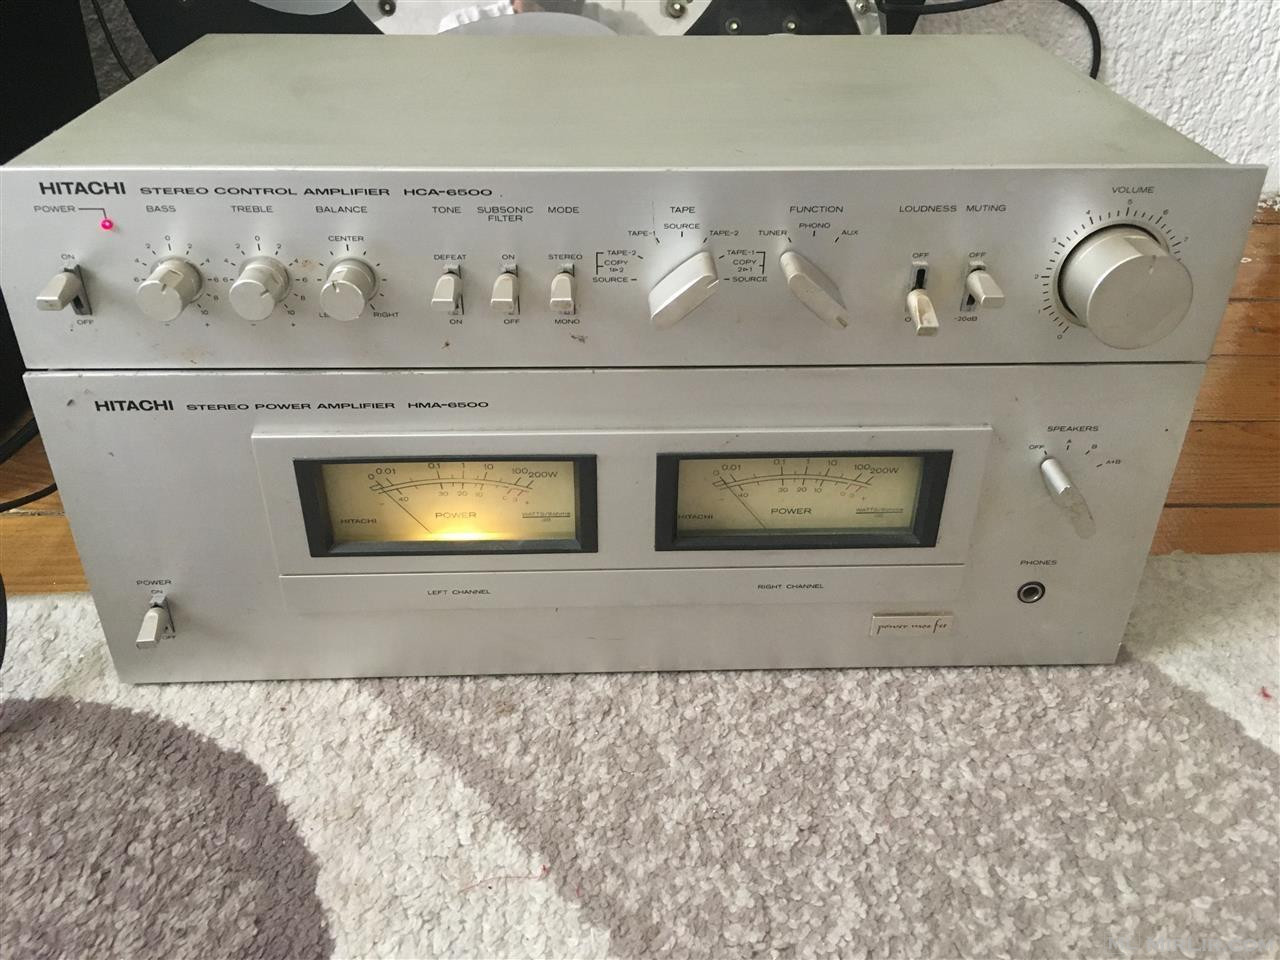 Perforcus Hitachi stereo power amplifier HMA-6500